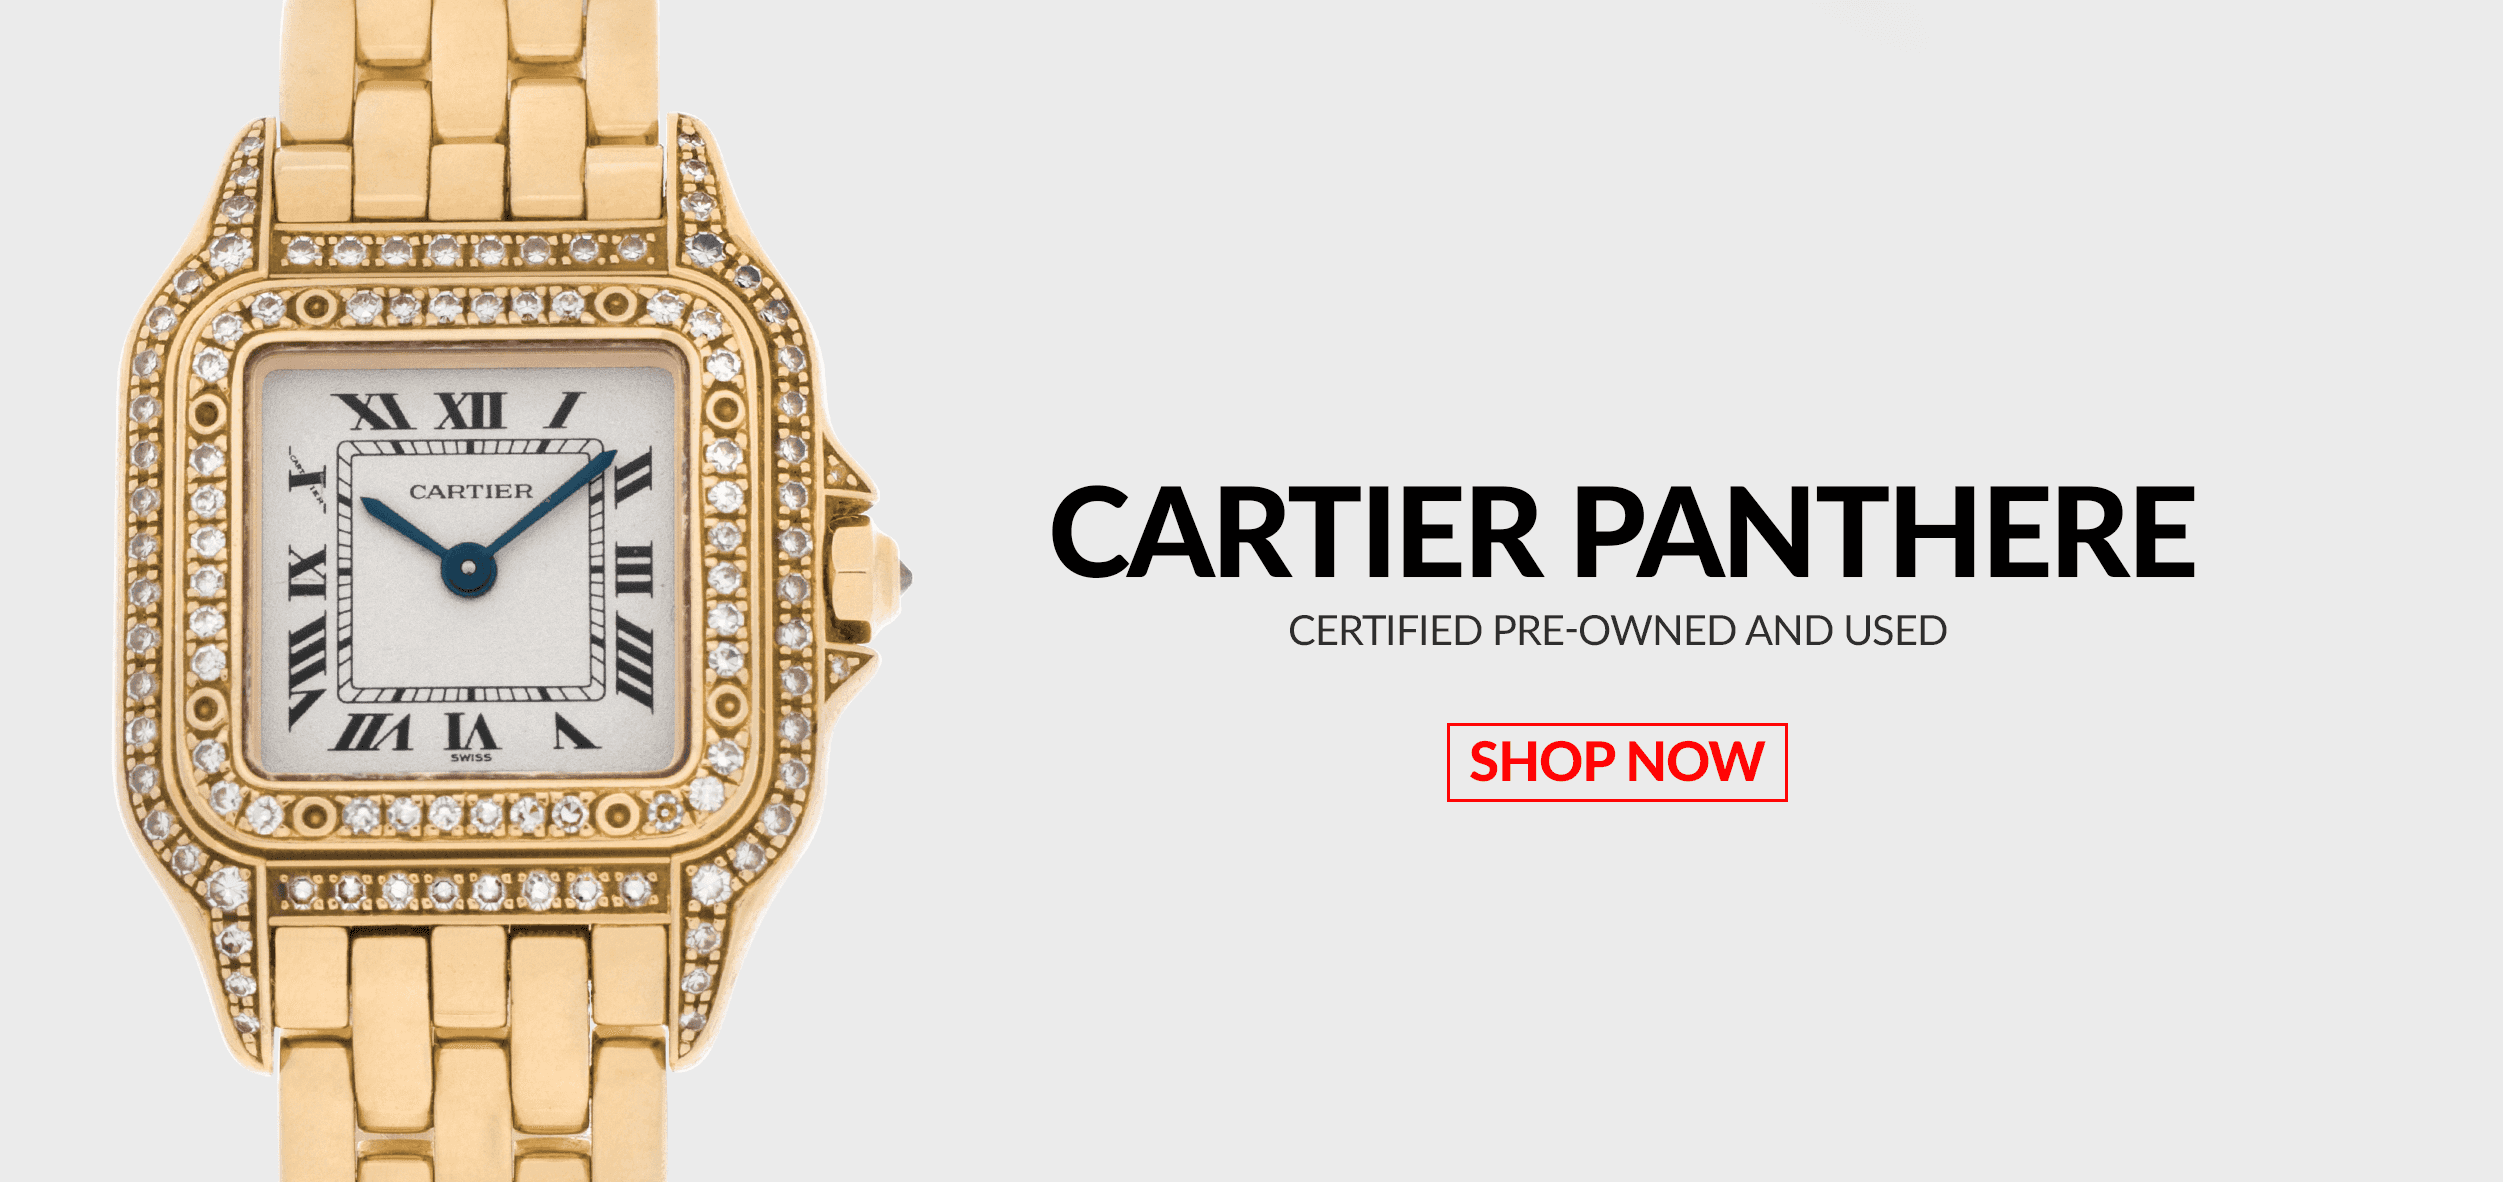 Pre-Owned Certified Used Cartier Panthere Header